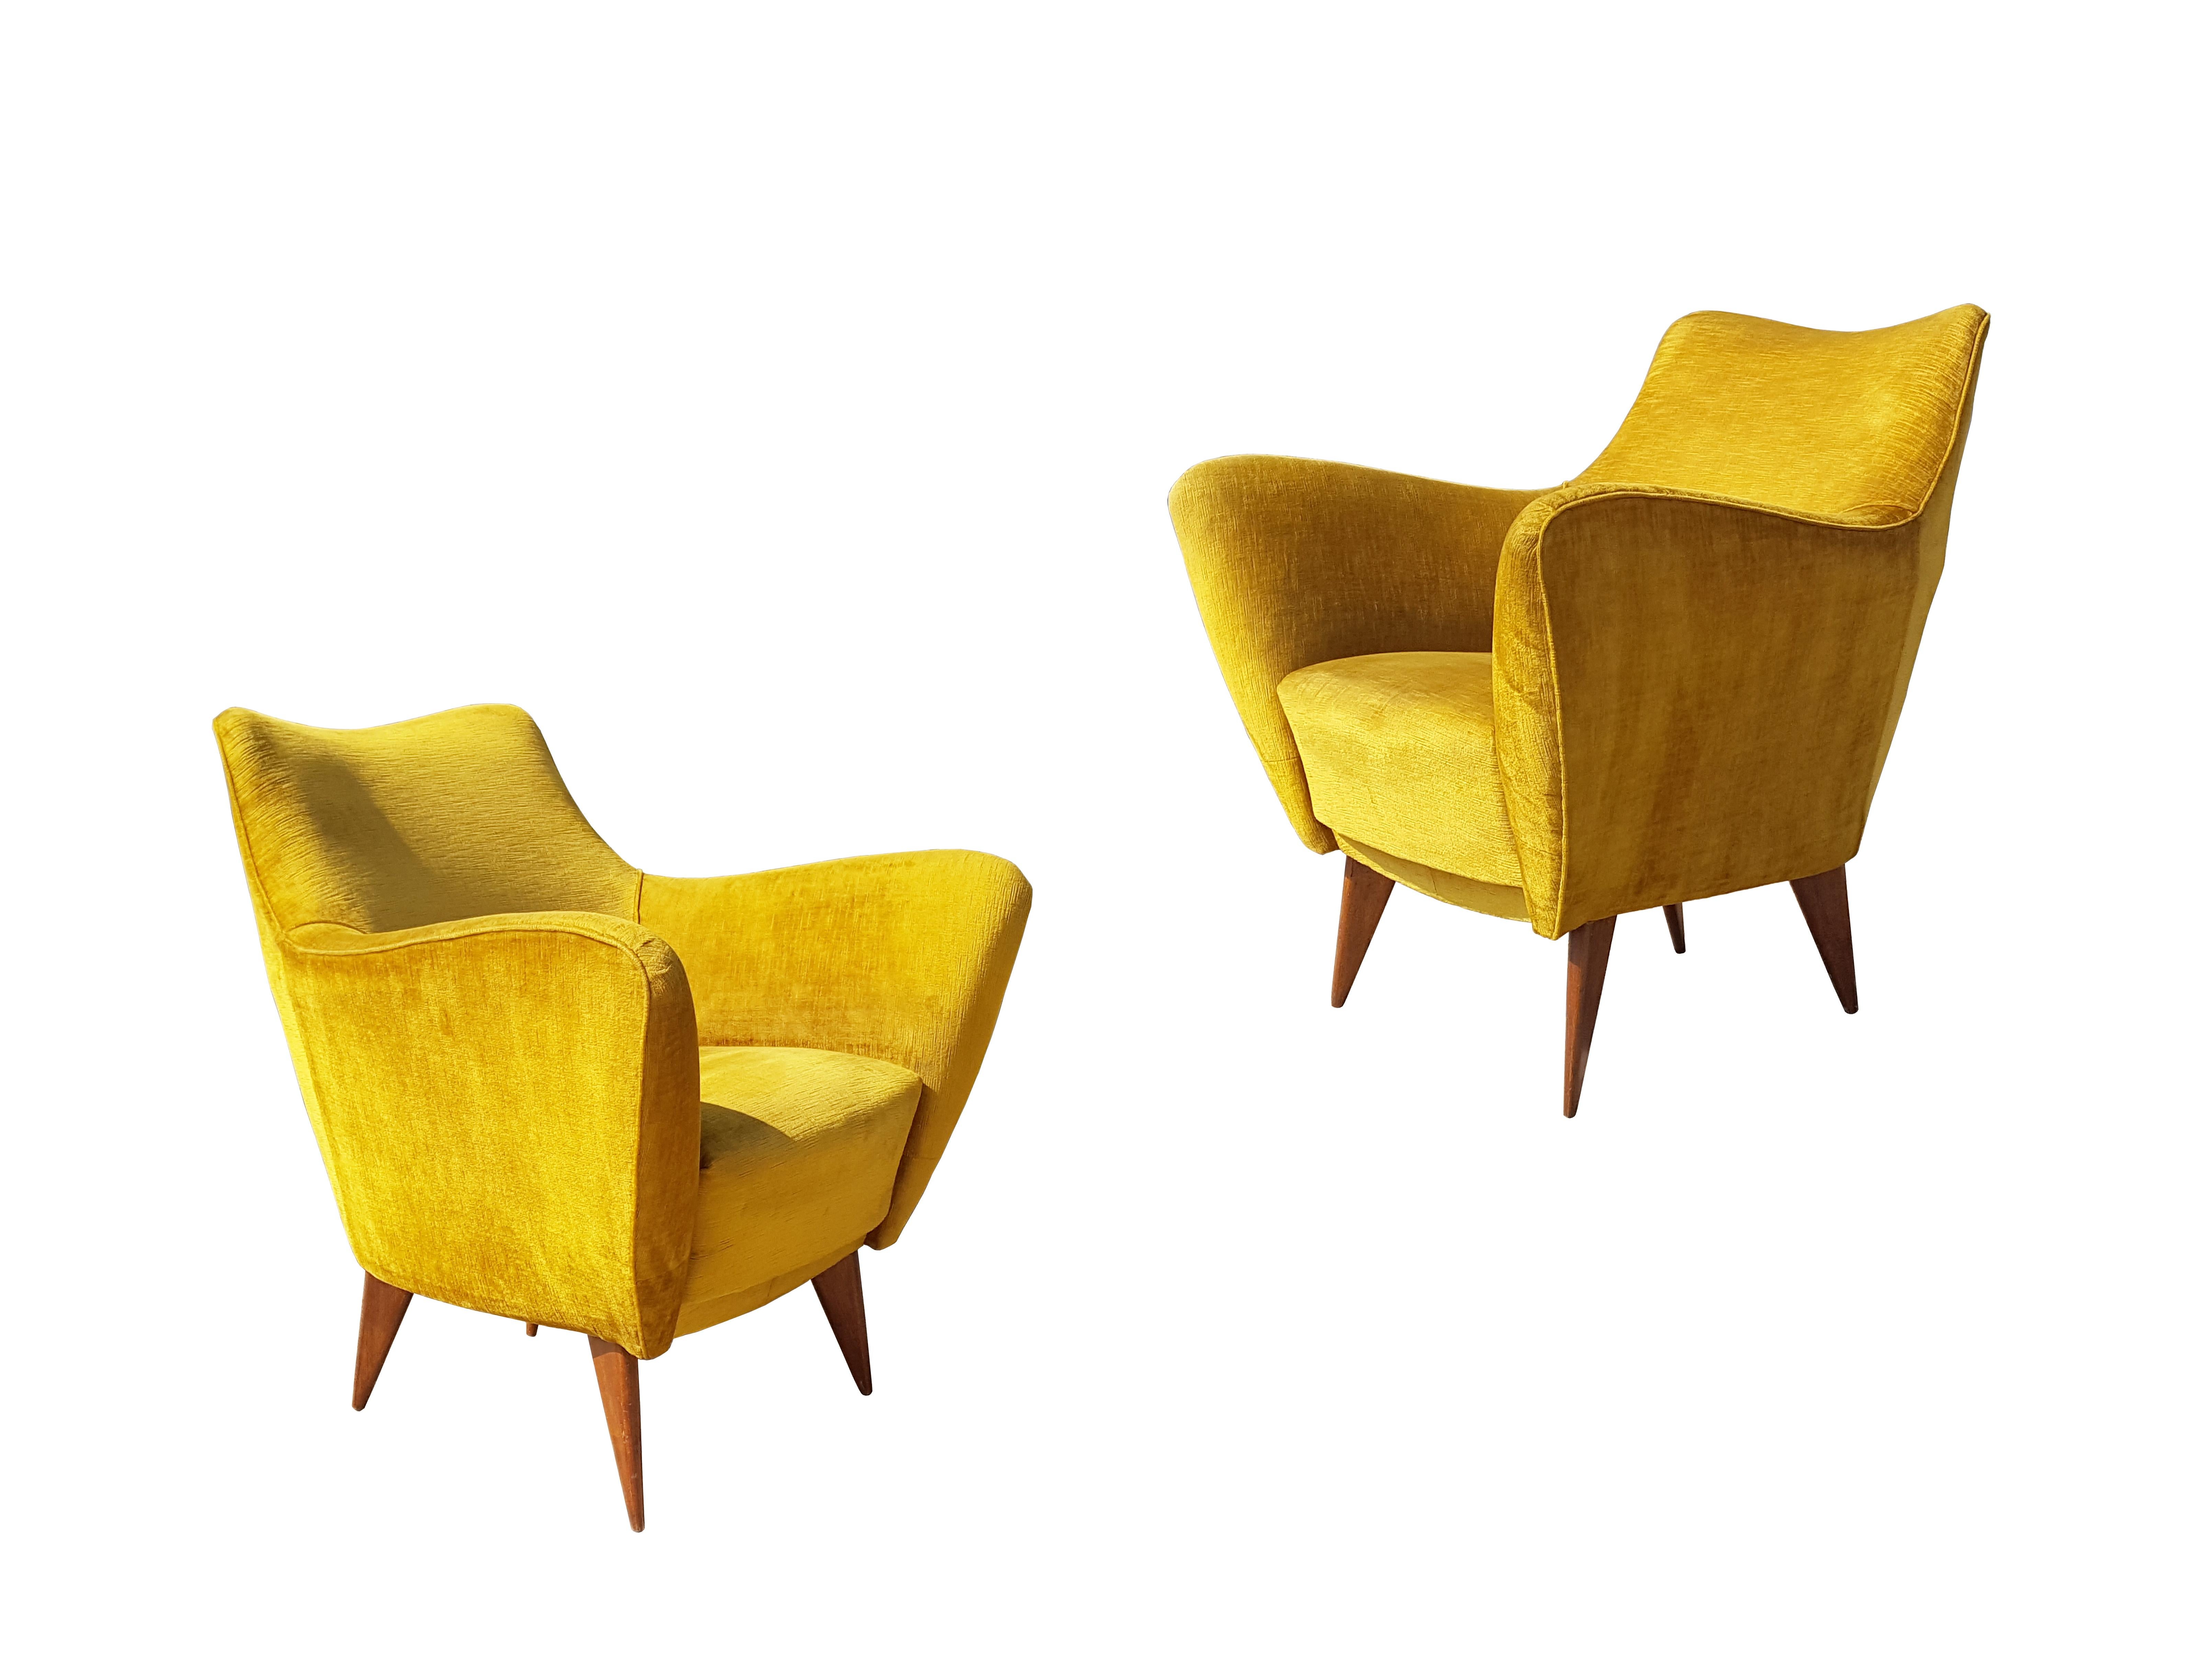 Fabric Pair of Ocra Yellow Velvet and Wood 1950s Perla Armchair by G. Veronesi for ISA For Sale